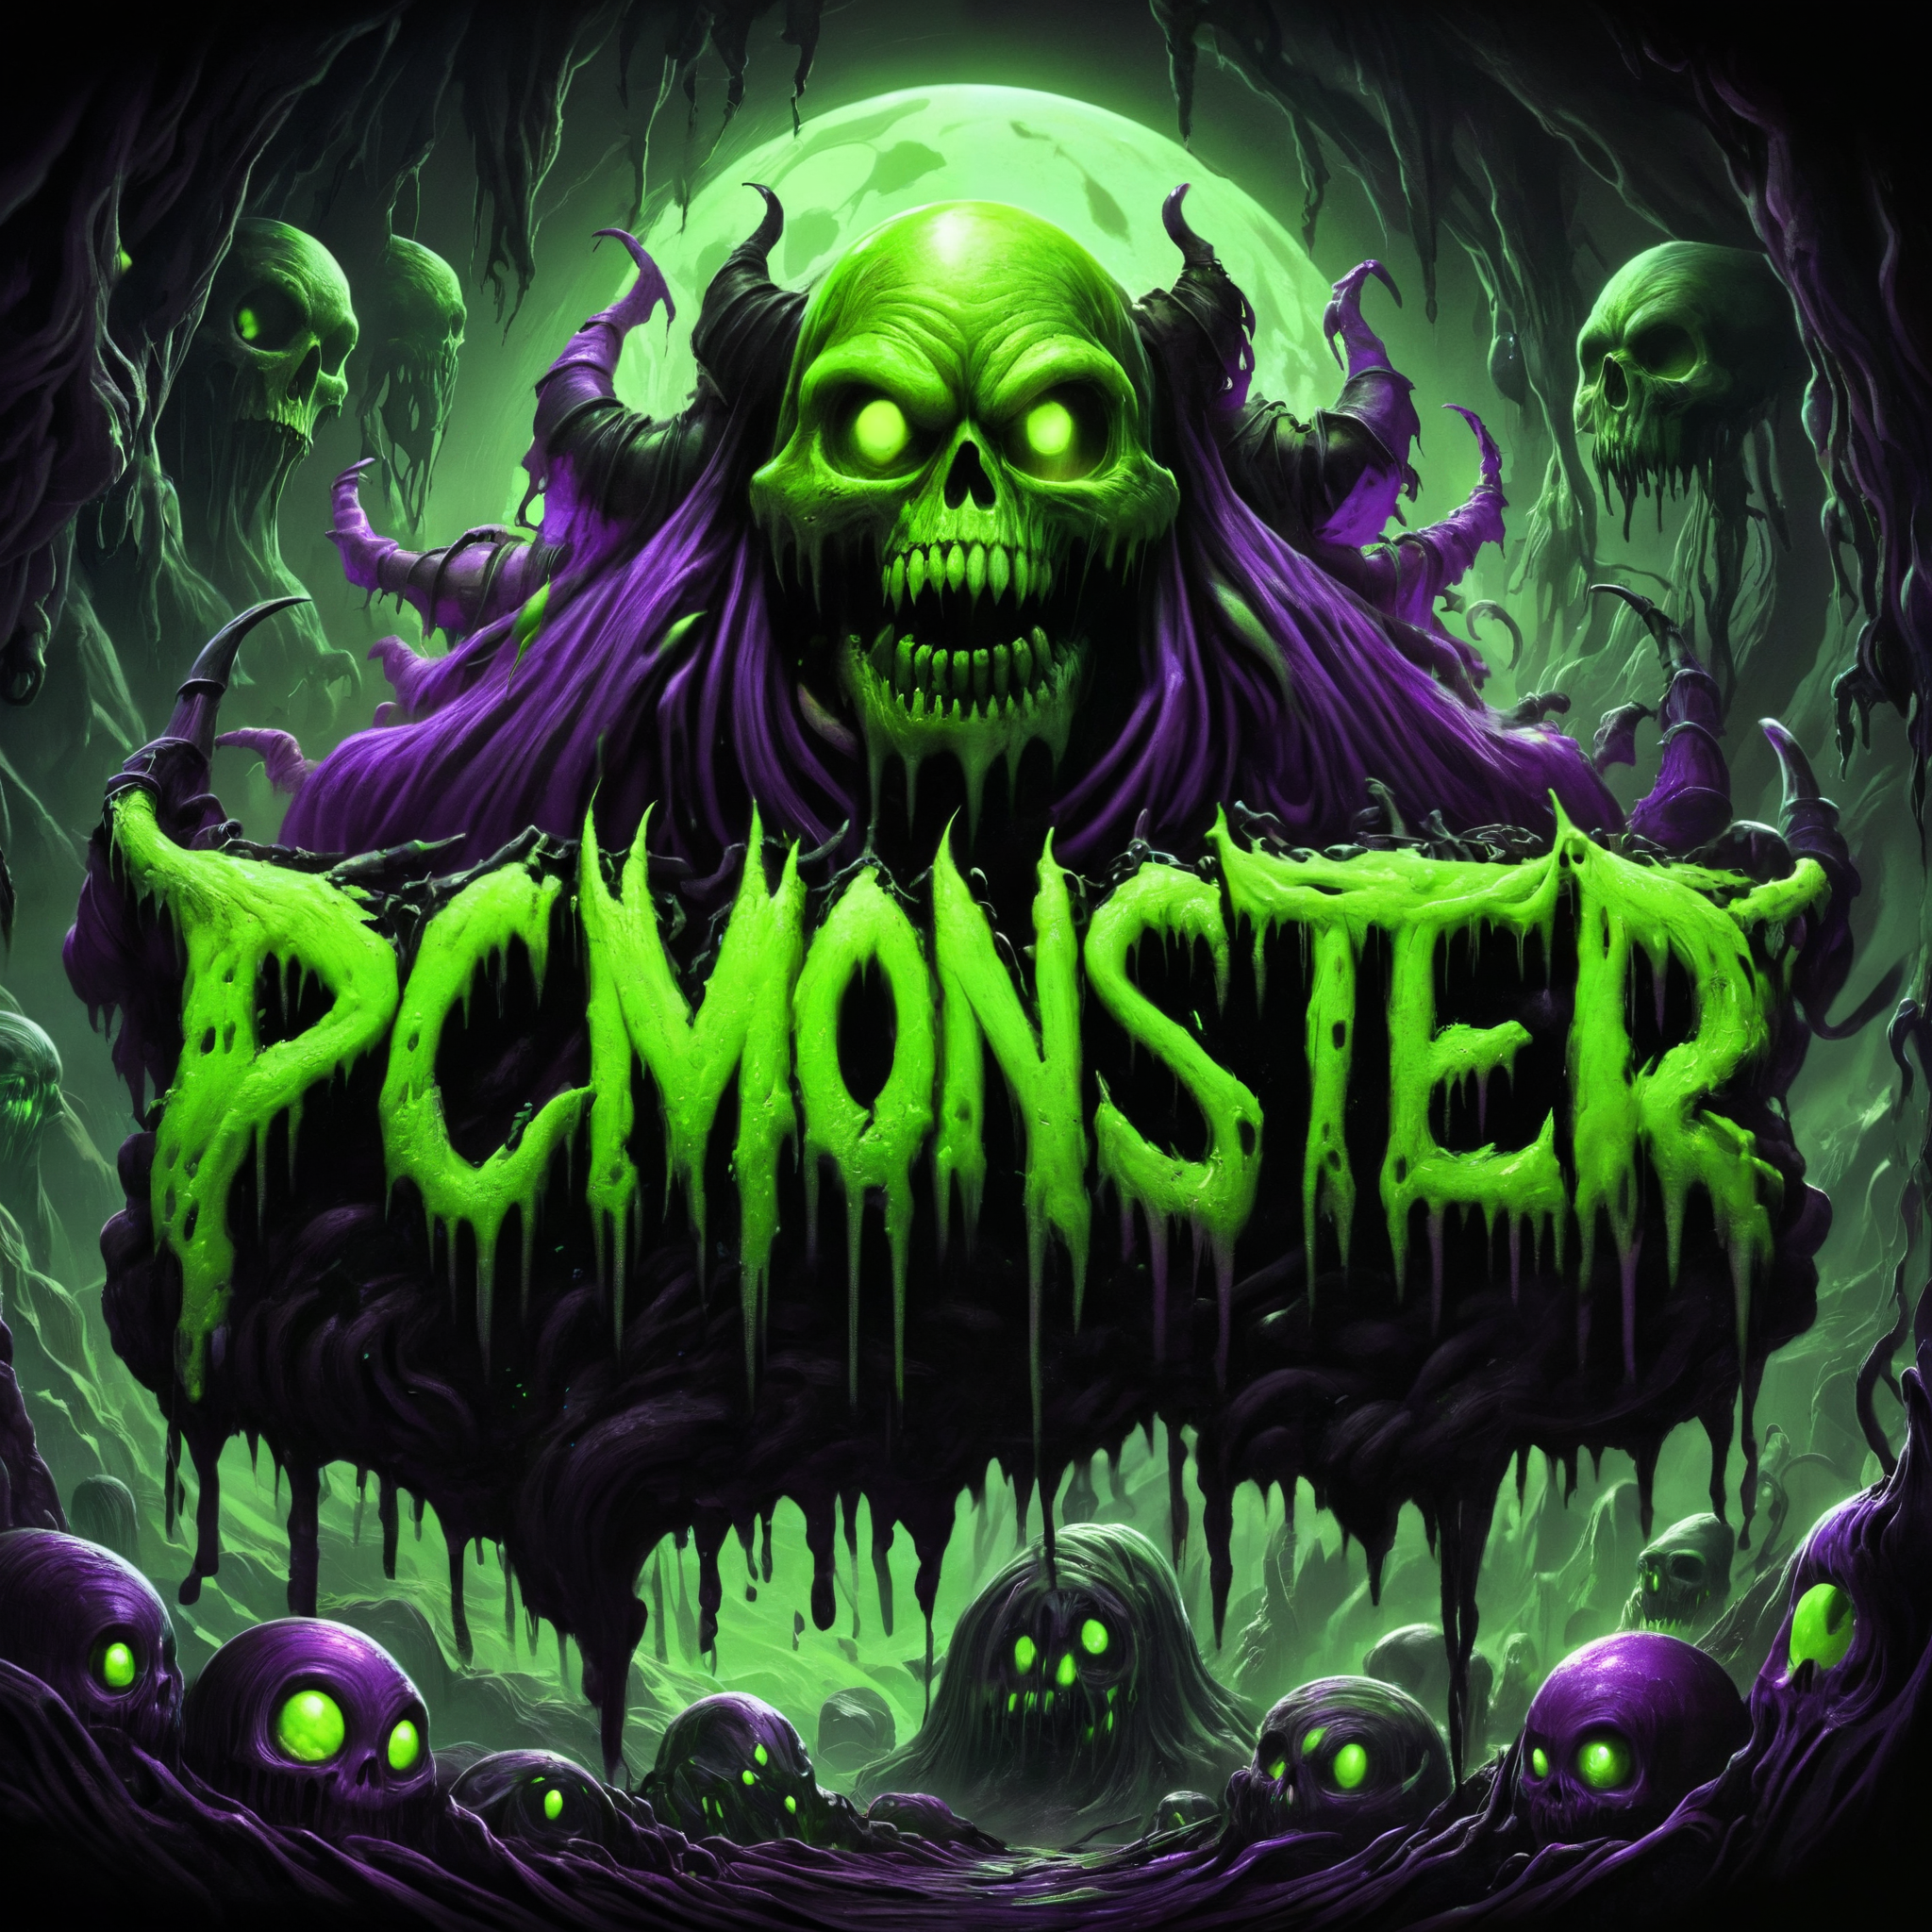 profile picture for user pcmonster